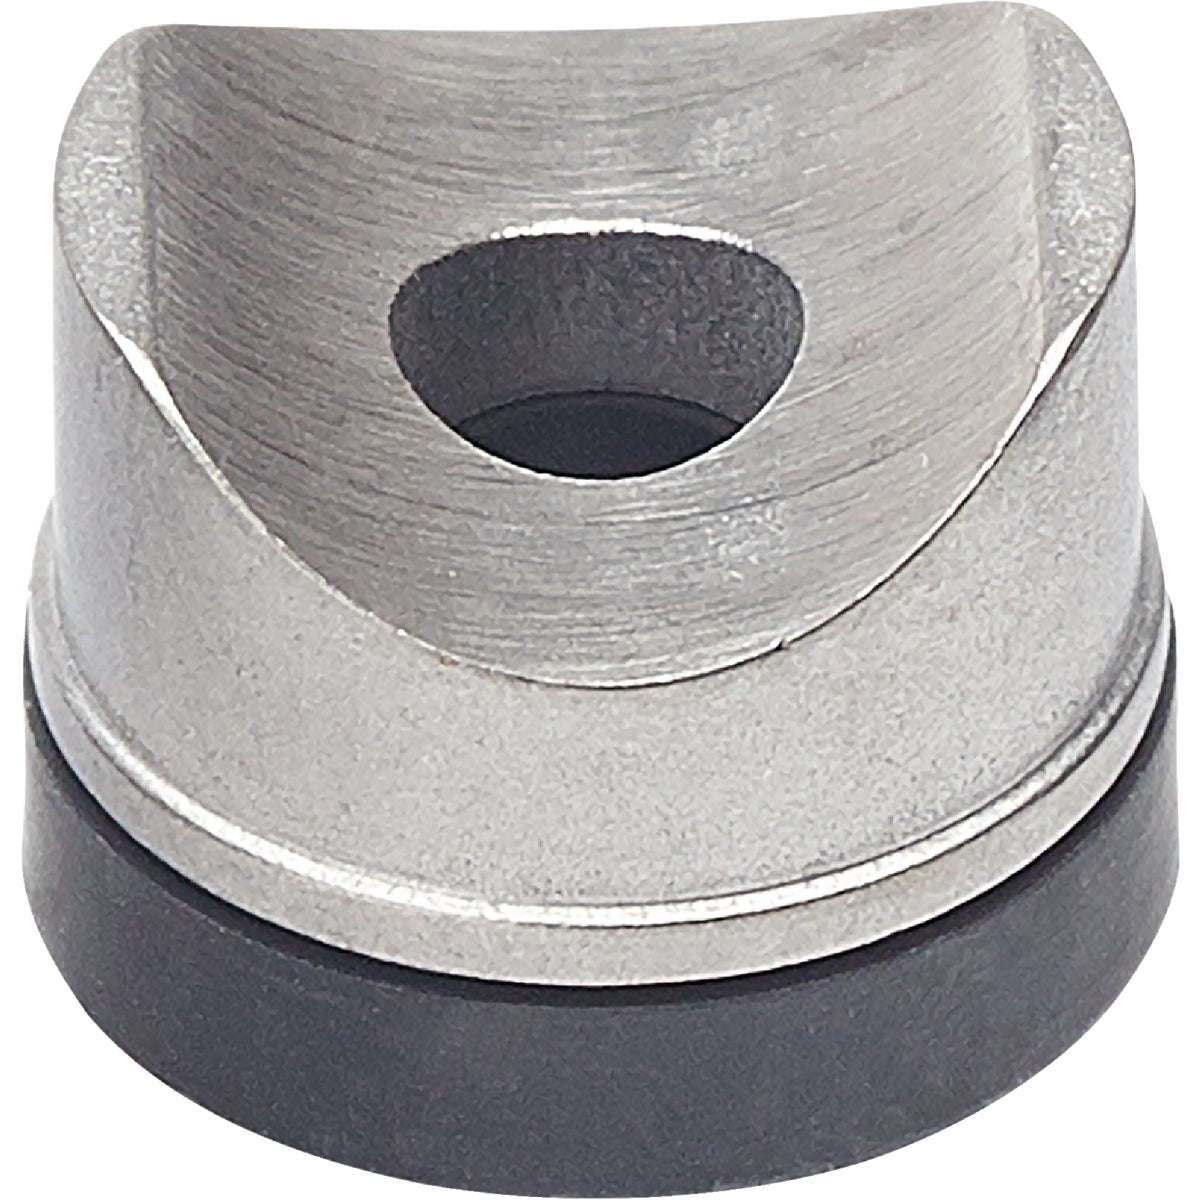 Item 772324, The tip seal is a replacement seal for use with RAC IV SwitchTips.